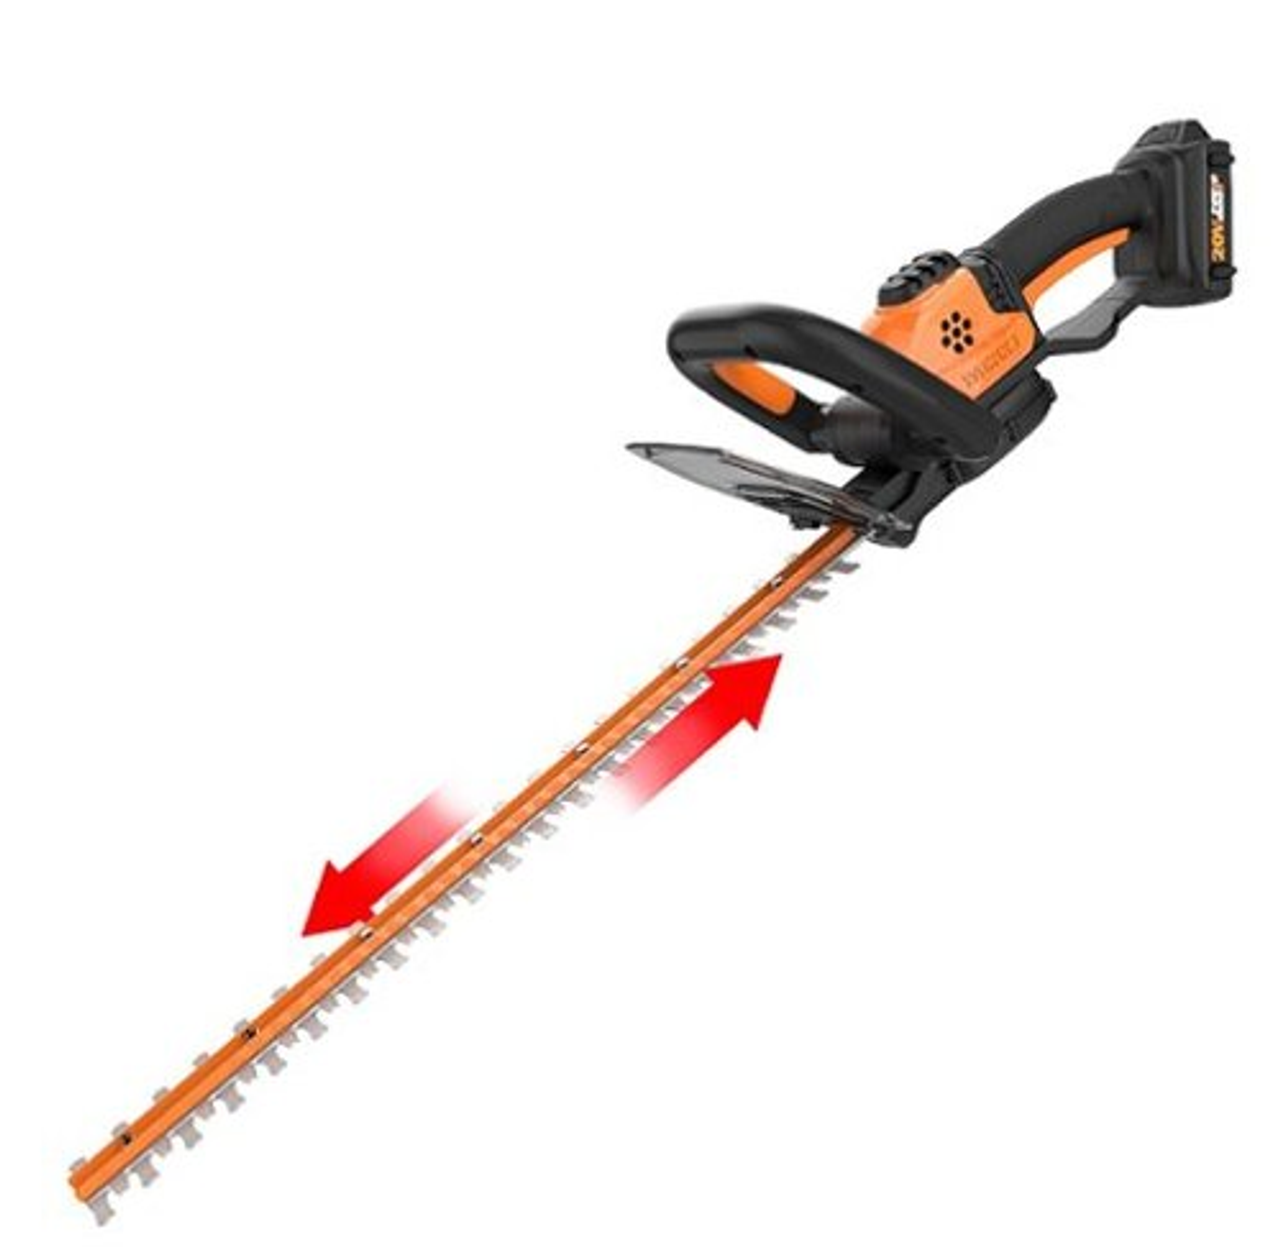 Worx WG261 20V Power Share Cordless 22" Hedge Trimmer (Battery & Charger Included) - Black